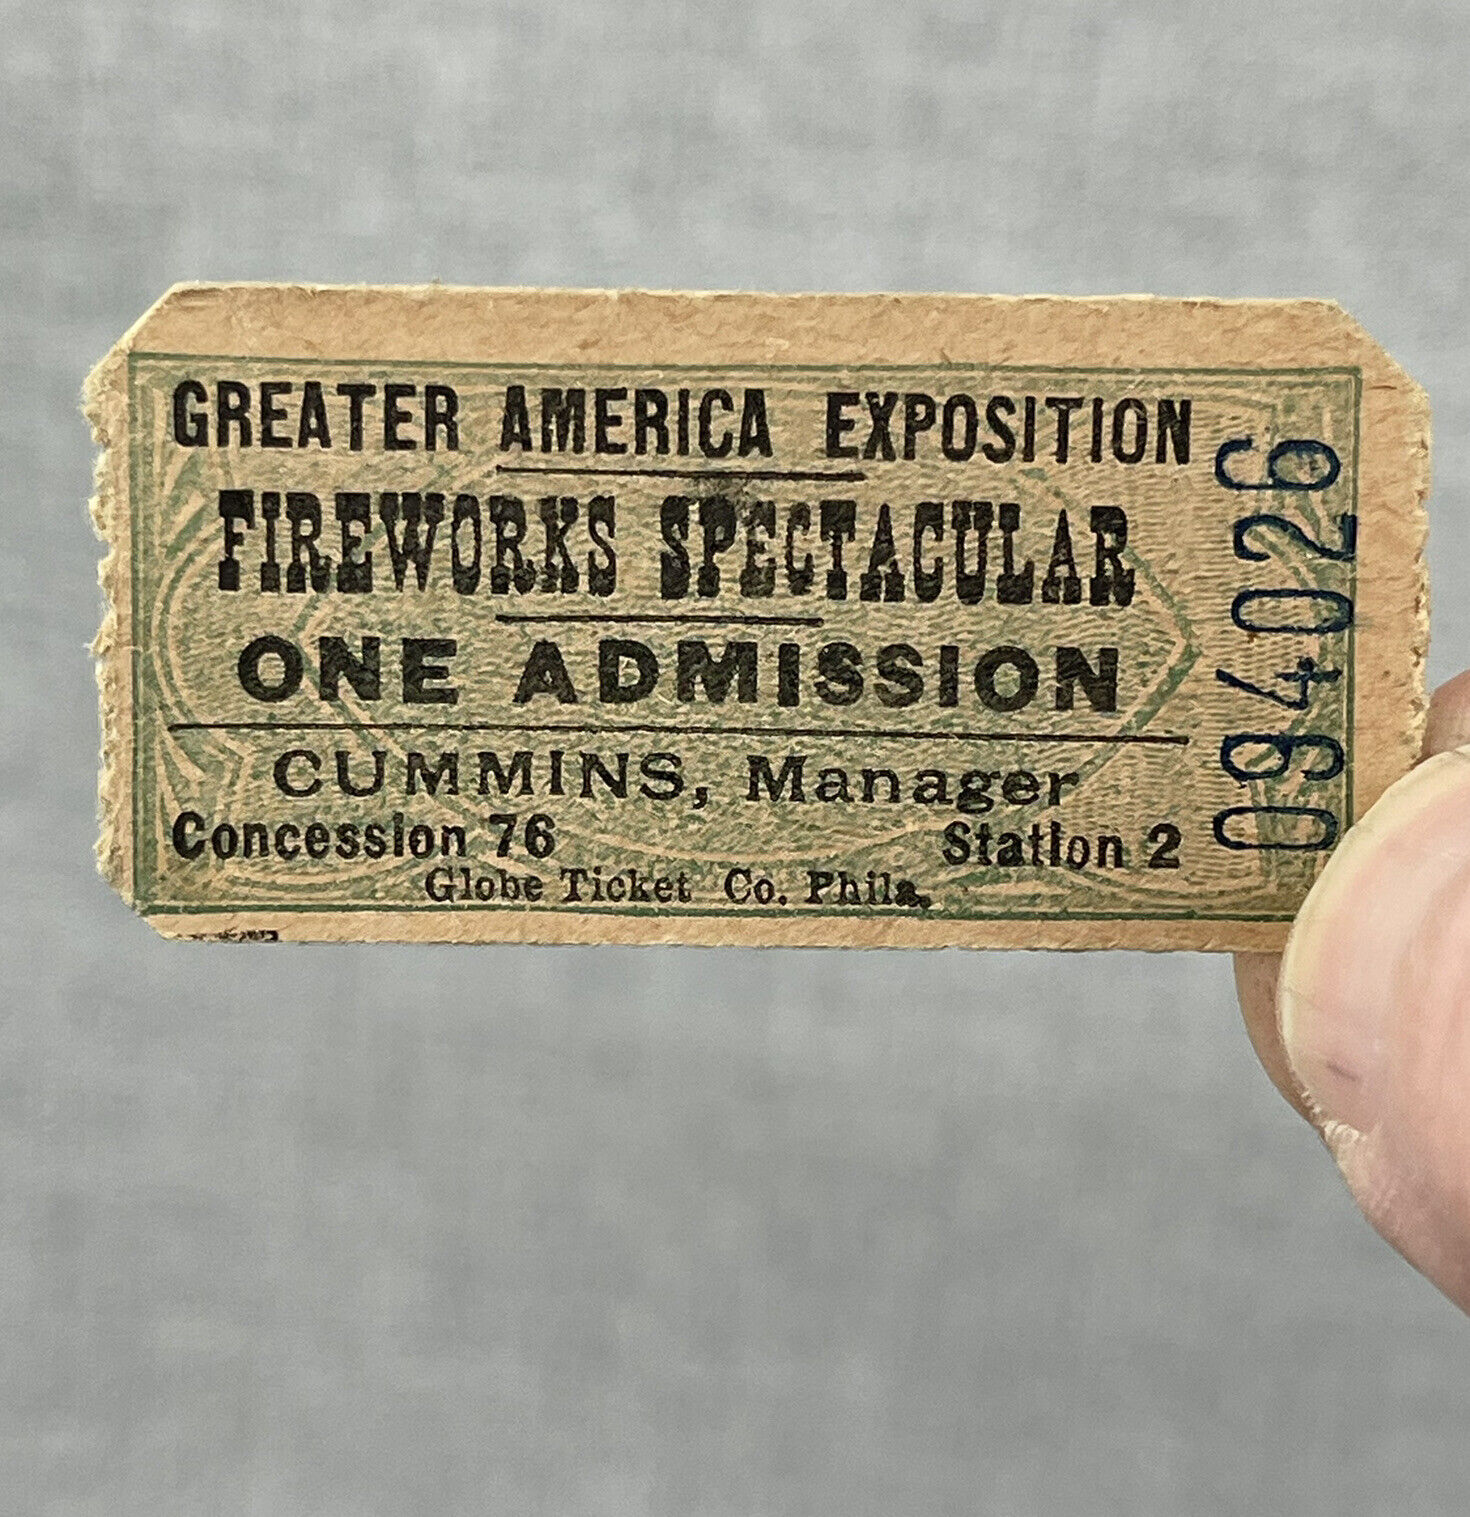 Fireworks Spectacular Ticket Greater America Exposition Omaha 1899